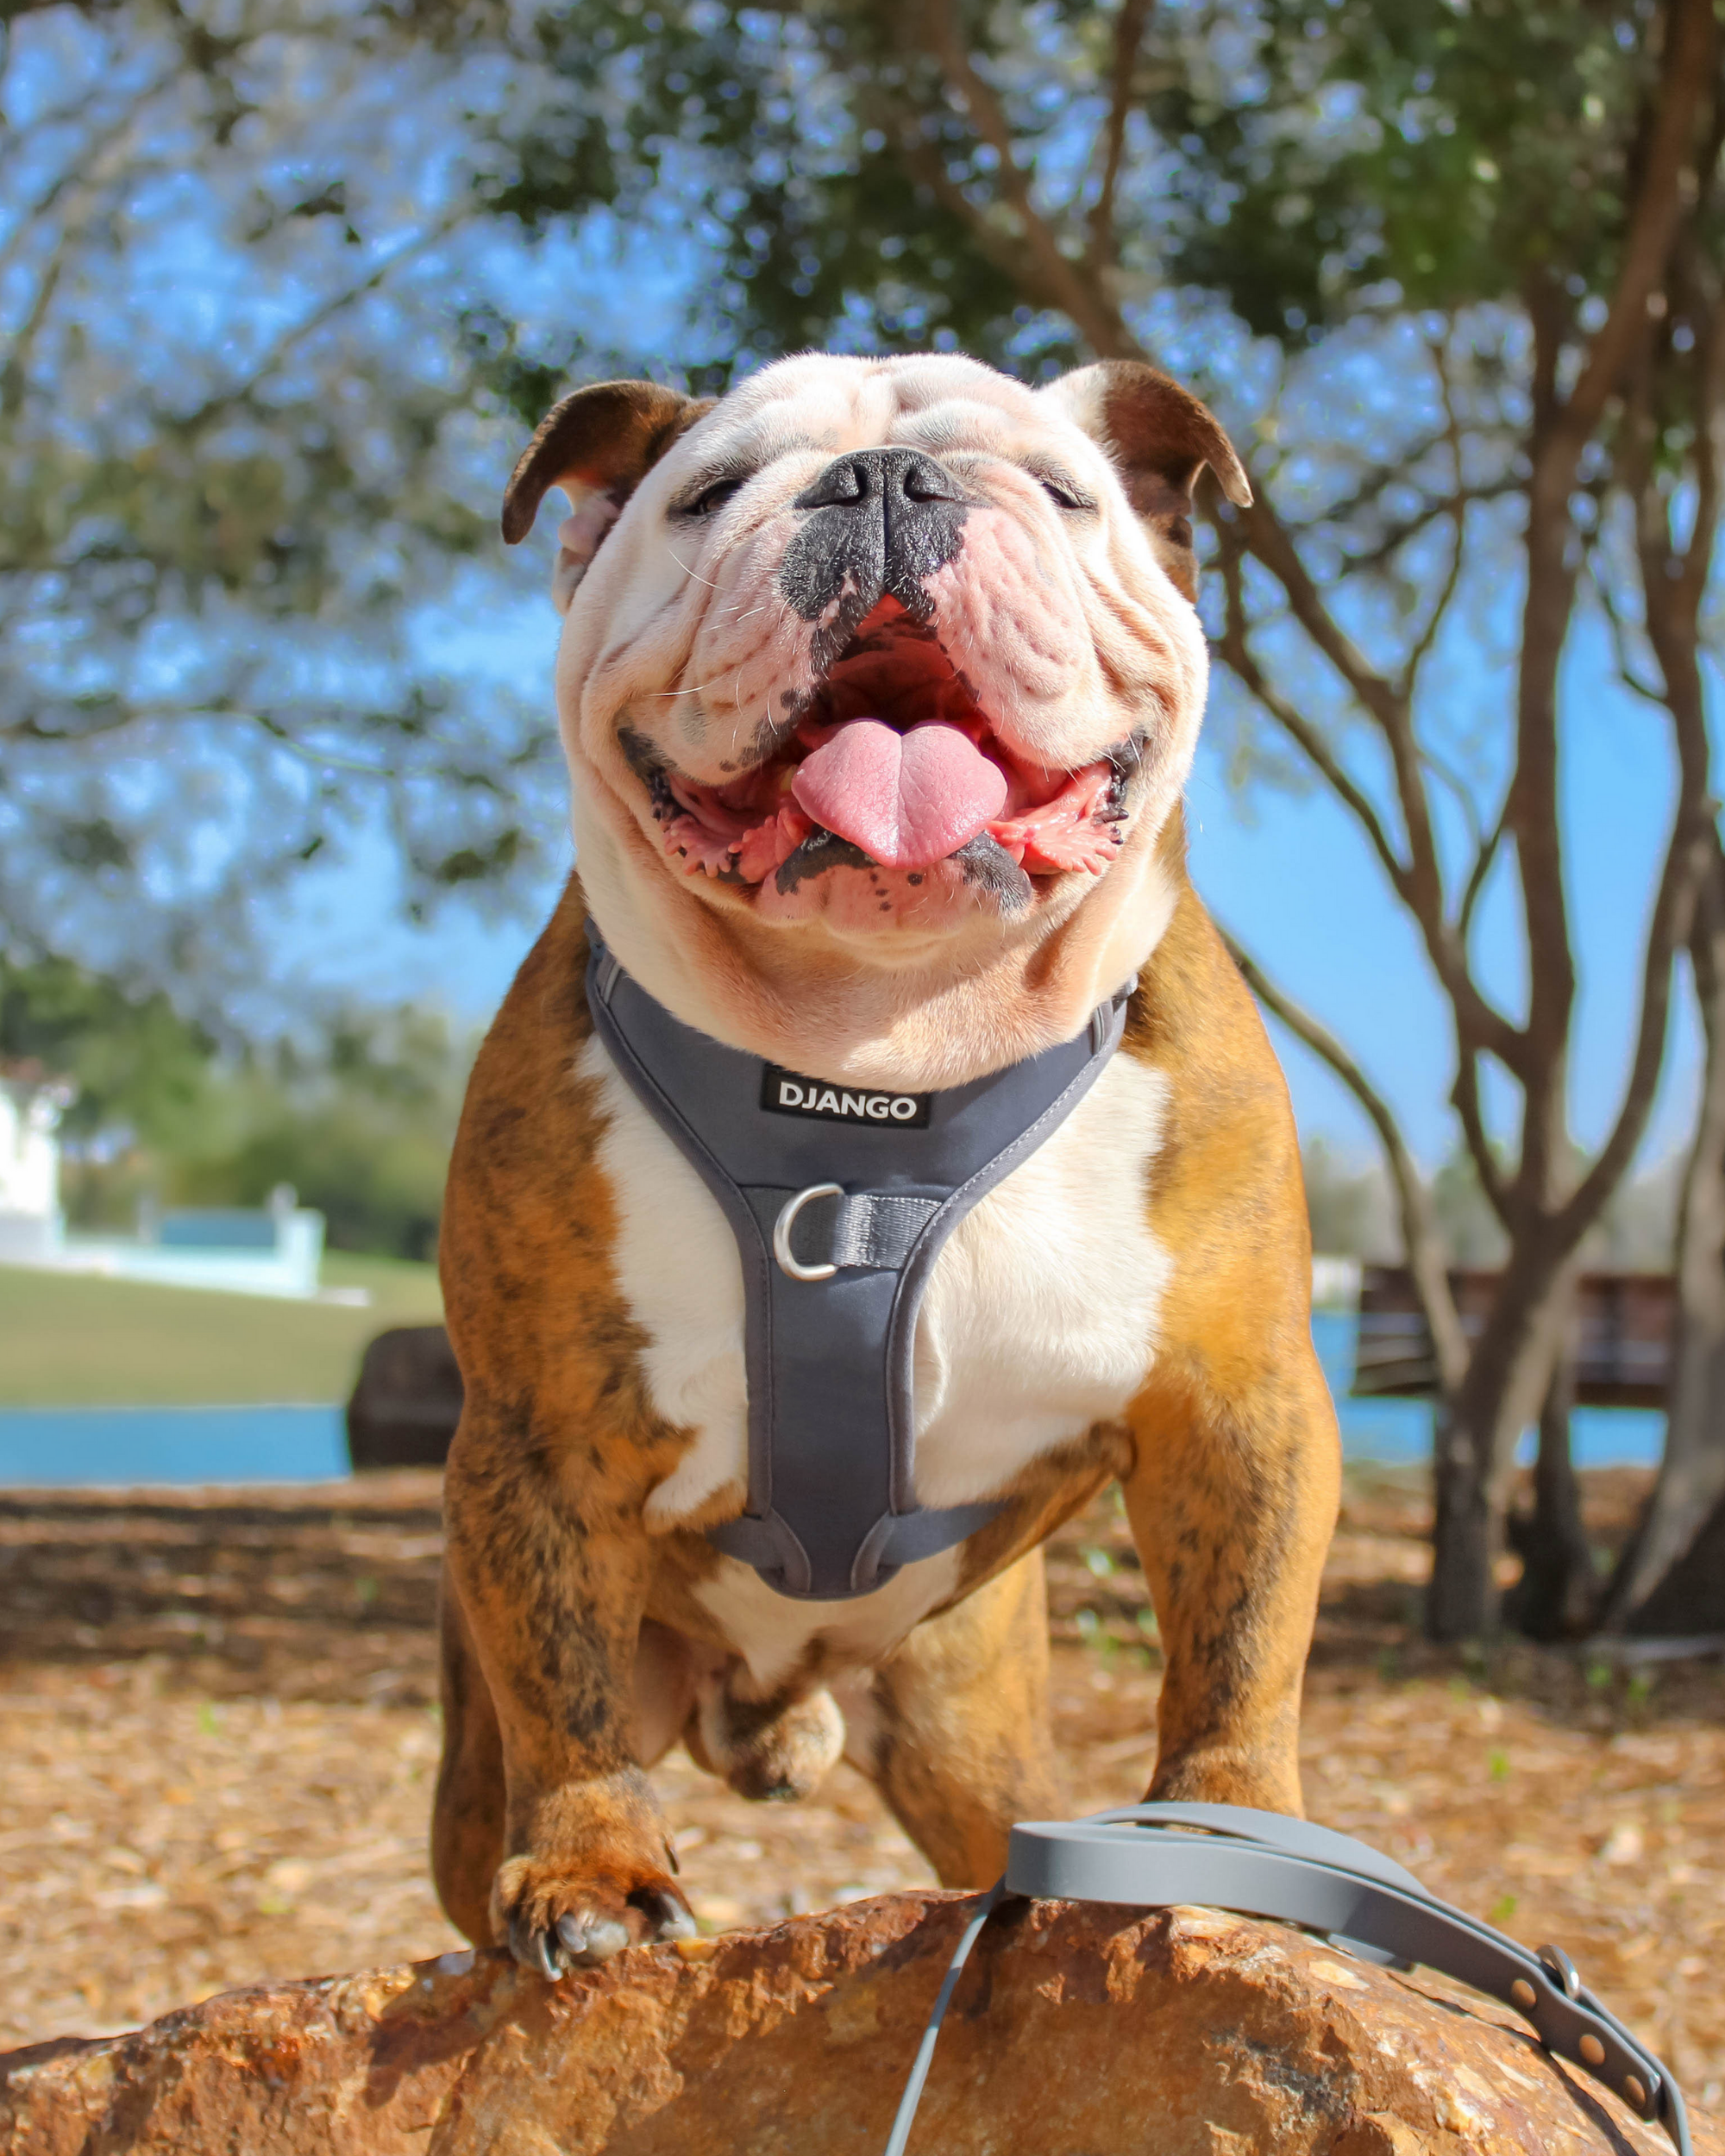 King of the world! Zeus the English bulldog is adventuring in his DJANGO no pull dog harness. Zeus wears a size large. All dogs are adventure dogs! - djangobrand.com